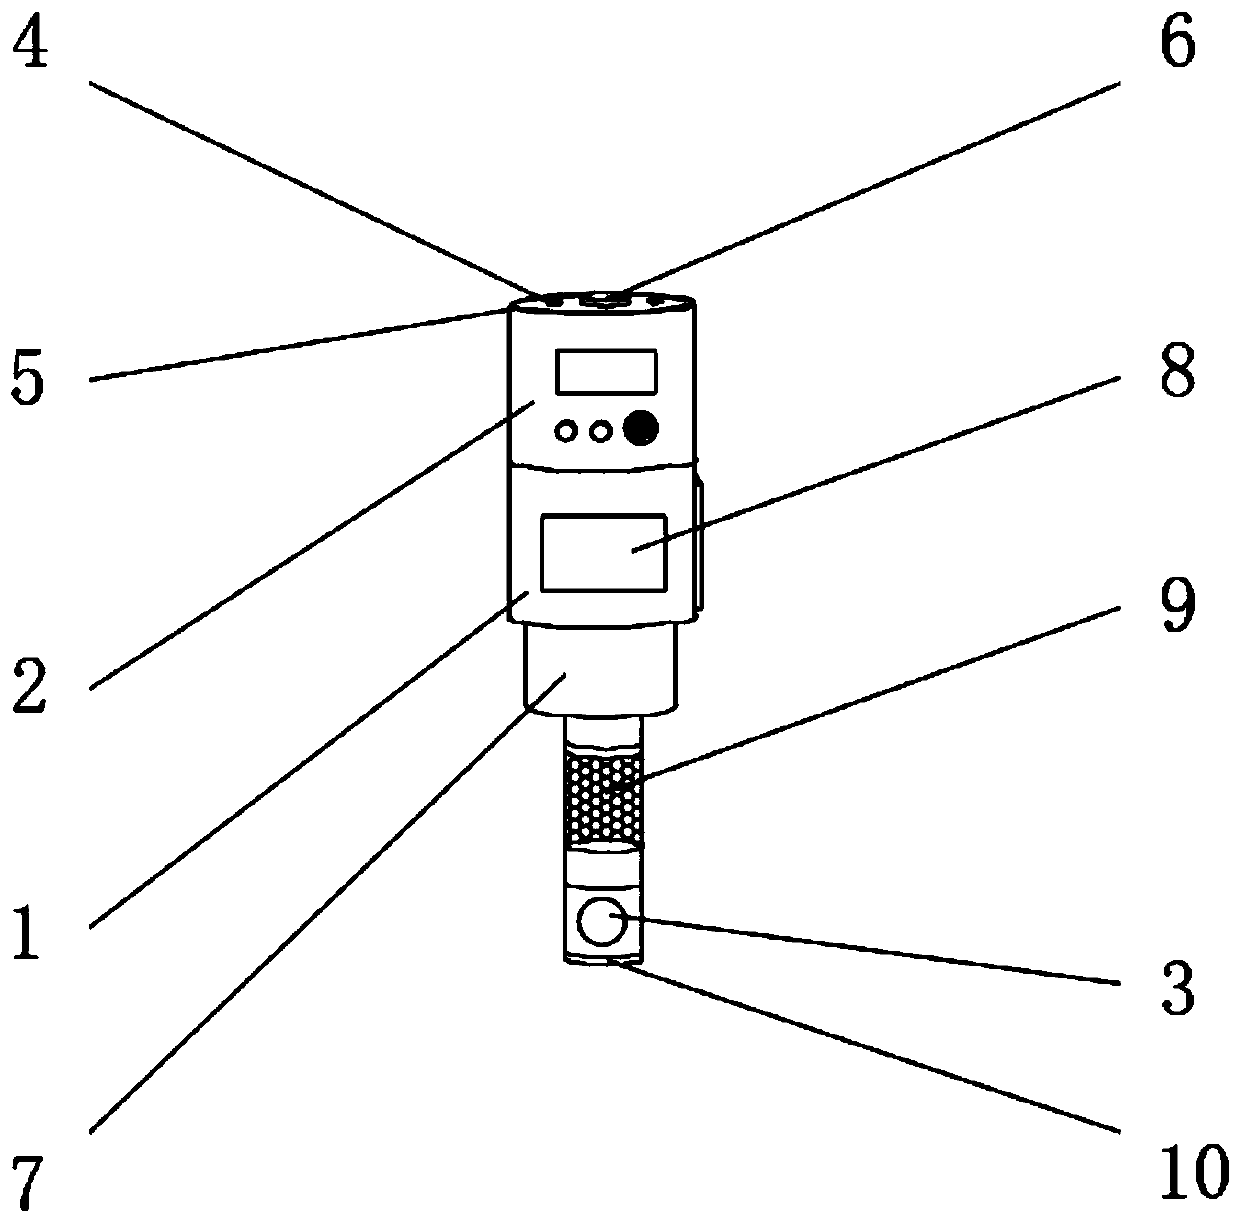 Insulin injection site and injection time reminding device